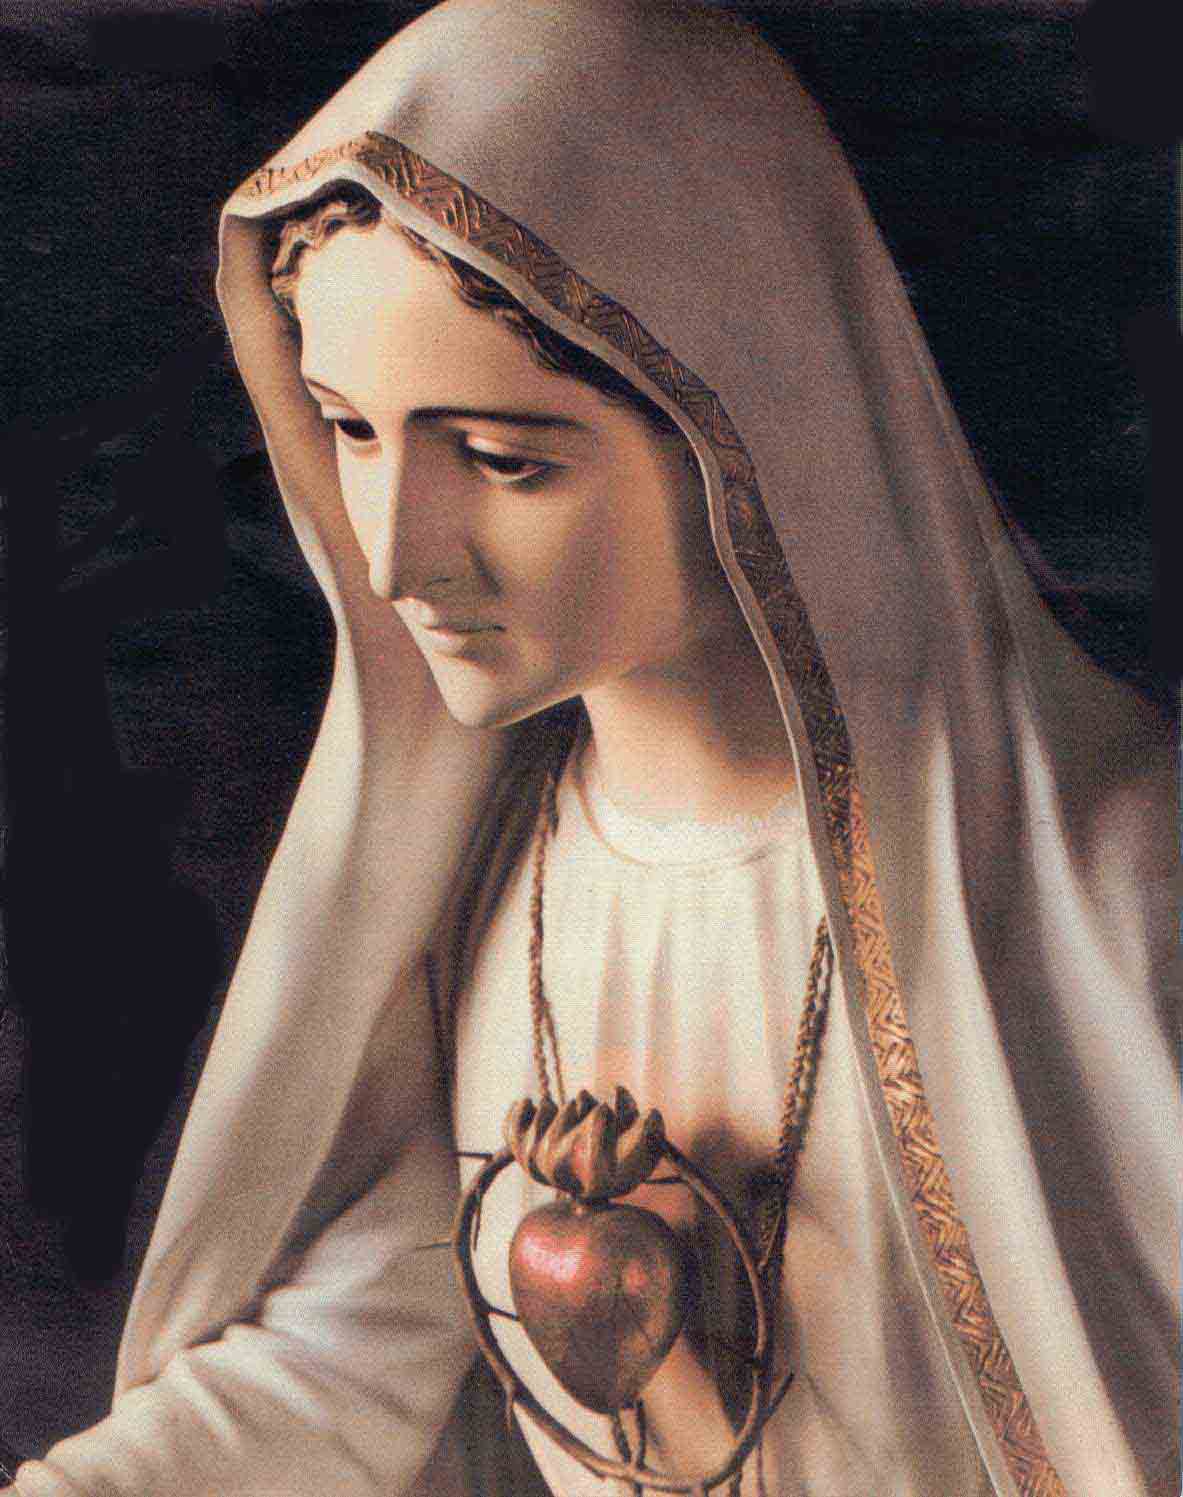 Our Lady of Fatima for us. Good Morning Lord, it's